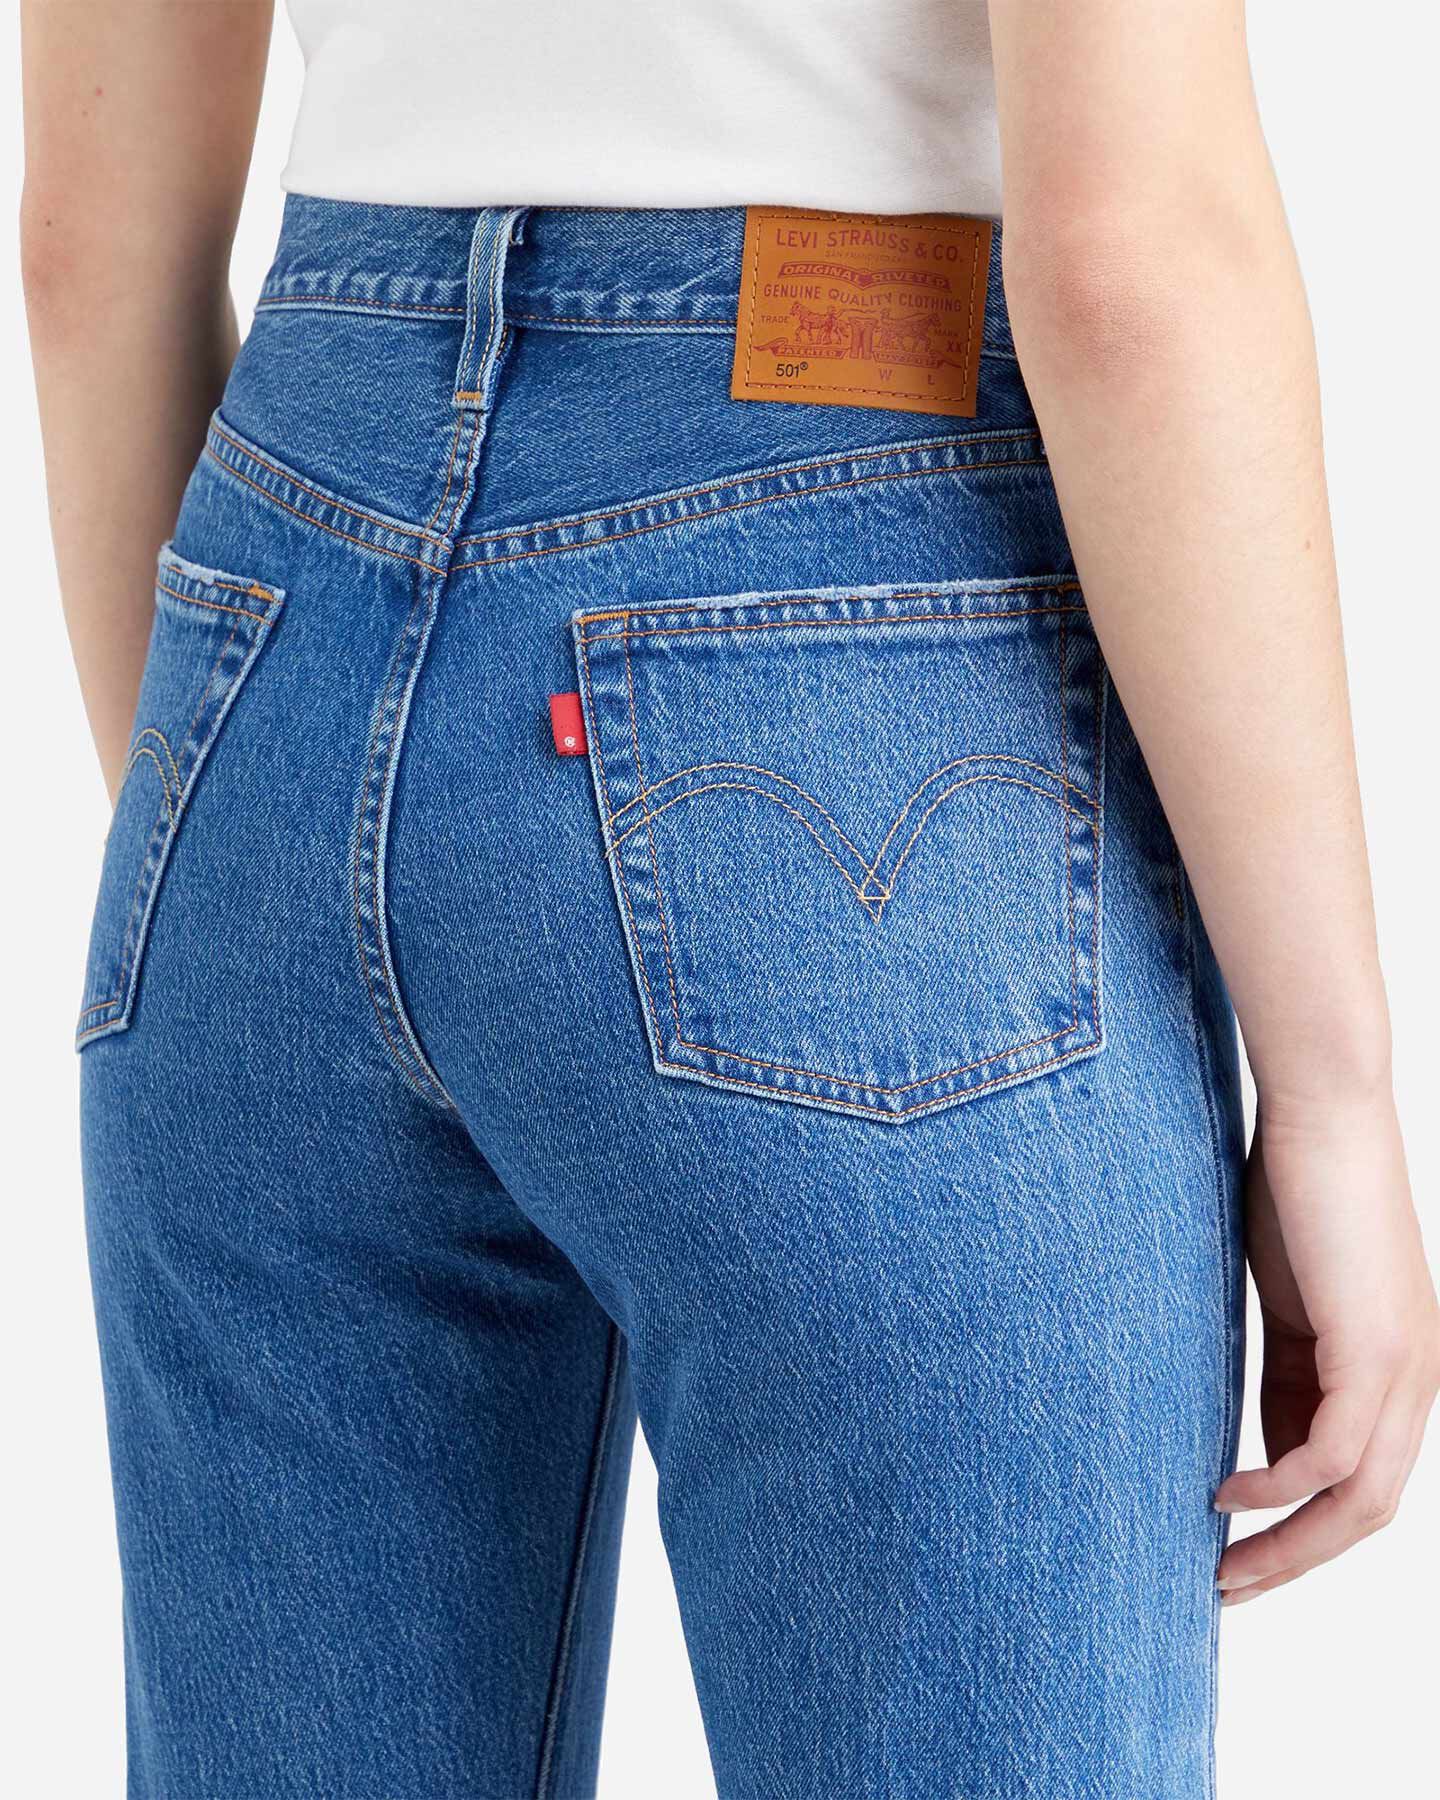  Jeans LEVI'S 501 CROP L28 W S4127913|0225|30 scatto 5